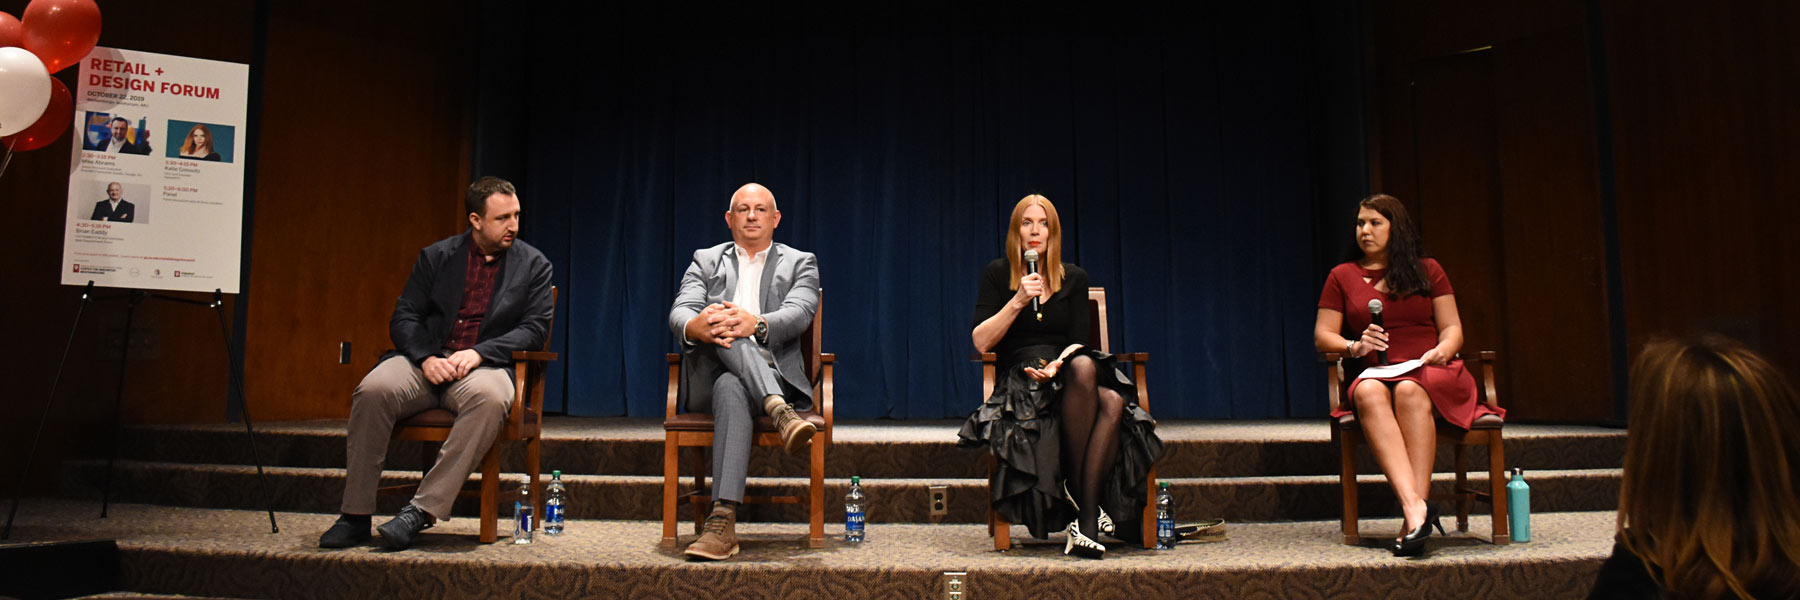 Four people participating in a panel discussion.